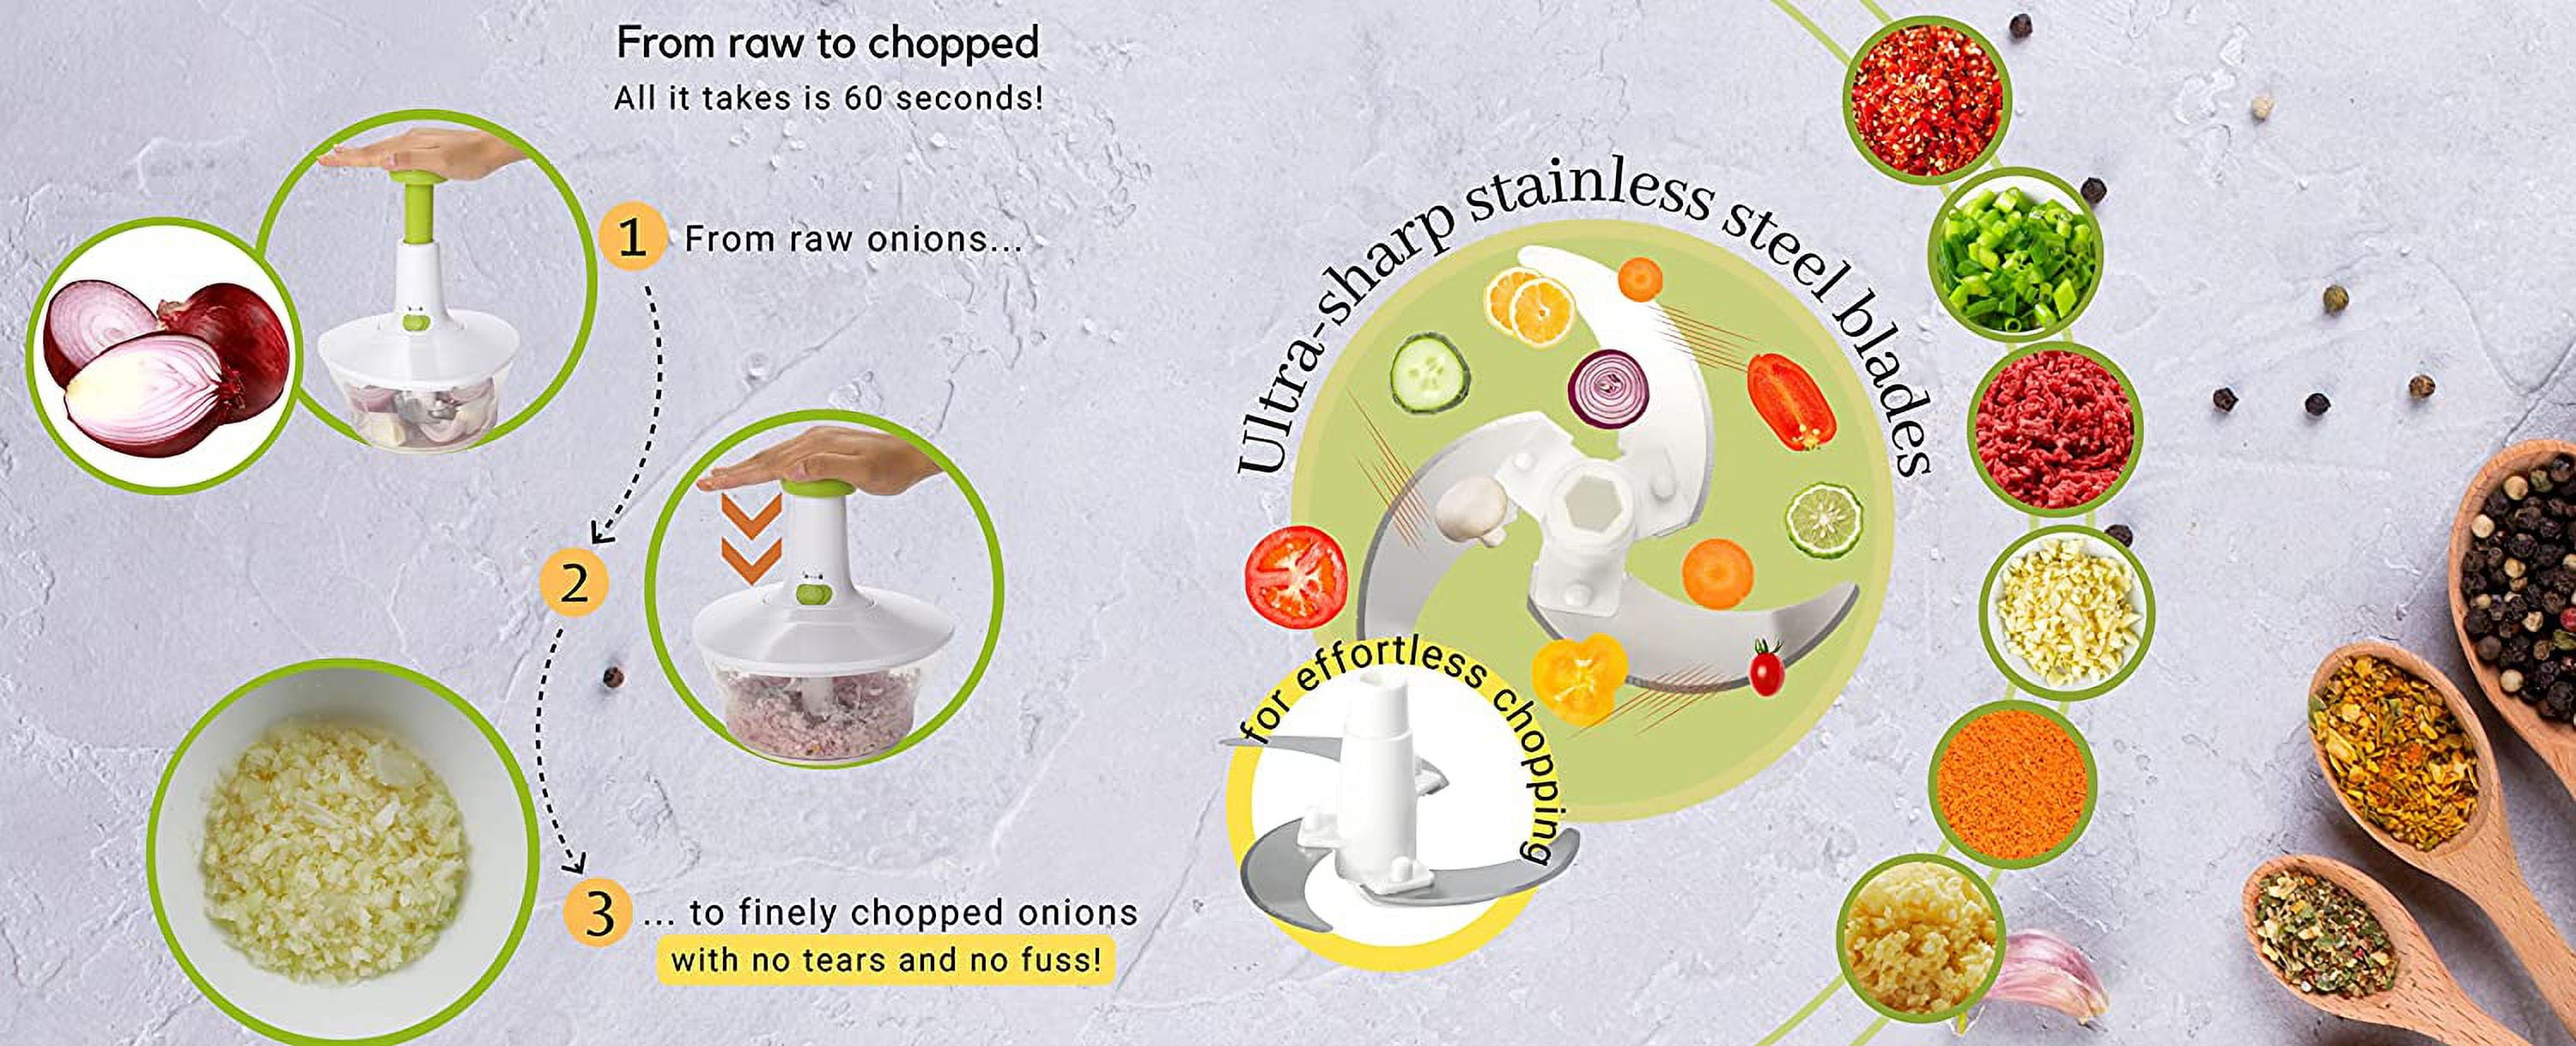 Brieftons Express Manual Food Chopper: 6.8-Cup, Hand Chopper Vegetable  Cutter to Chop Veggies, Fruits, Herbs, Garlic Onion Chopper for Salsa,  Salad, Pesto, Hummus, Guacamole, Coleslaw, Indian Cooking White - 6.8 Cup 